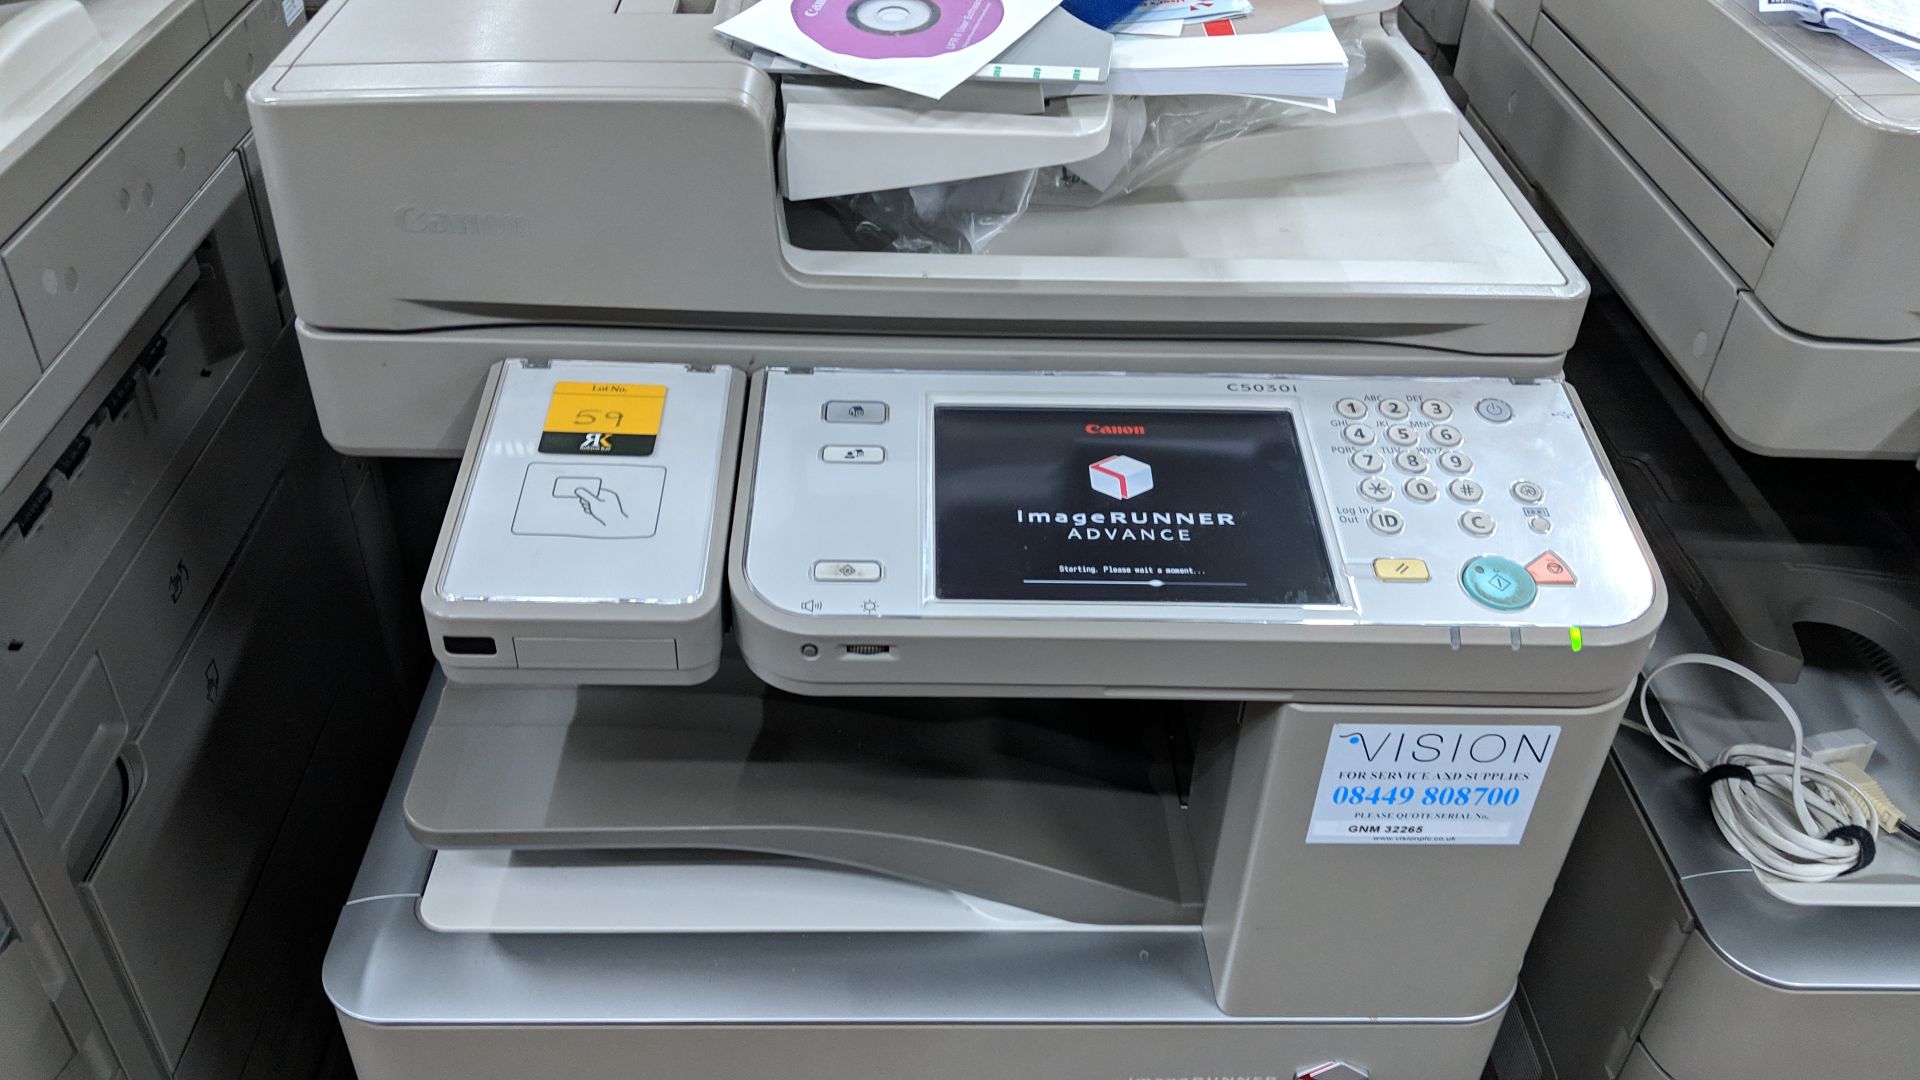 Canon imageRUNNER Advance model C5030i floorstanding copier with auto docufeed & pedestal - Image 6 of 10